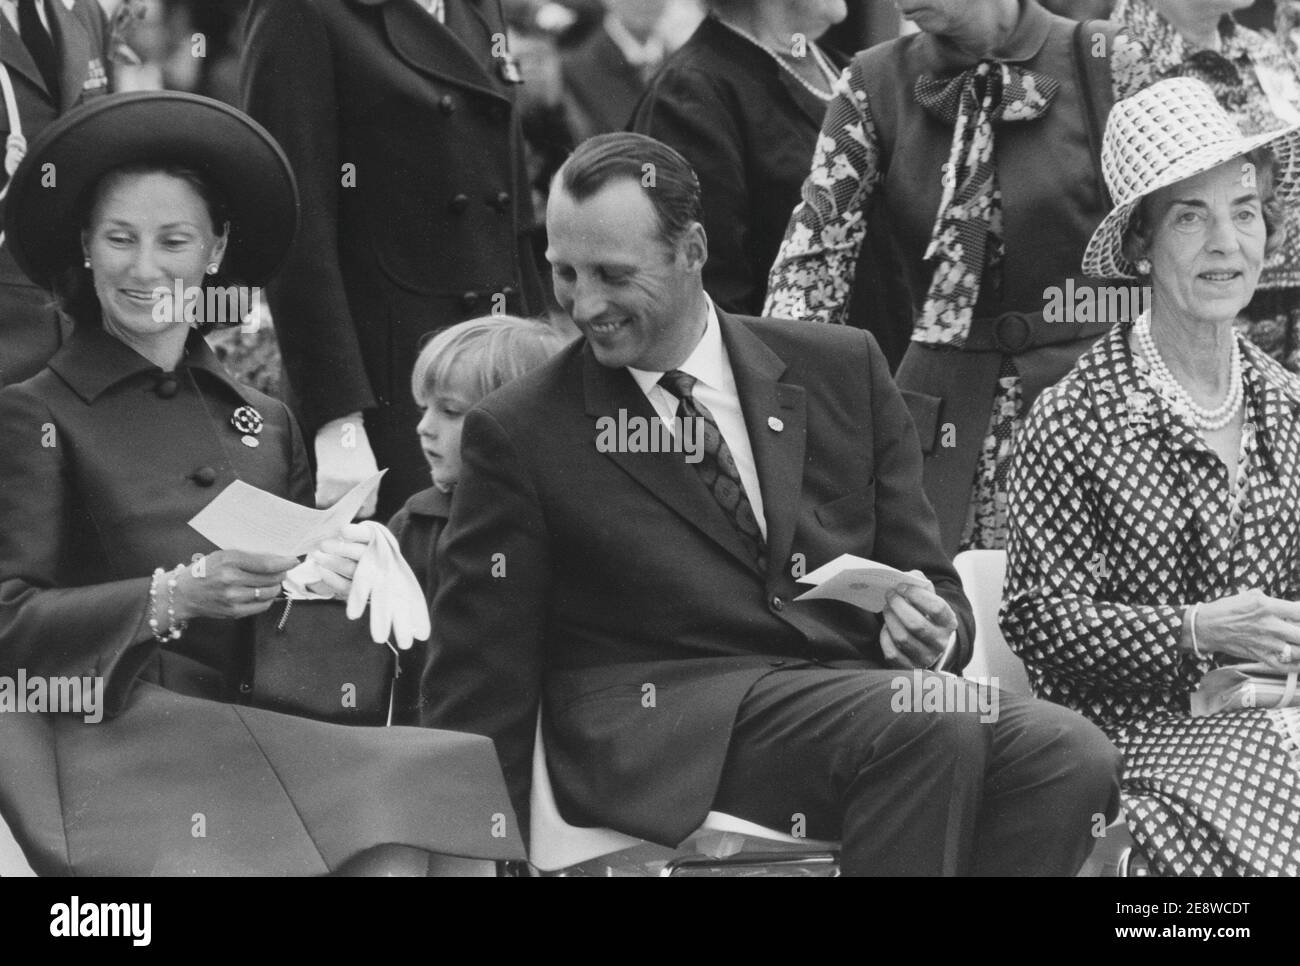 King Harald of Norway. Pictured when being crown prince with his wife Sonja 1972. To the right Queen Ingrid of Denmark. Stock Photo